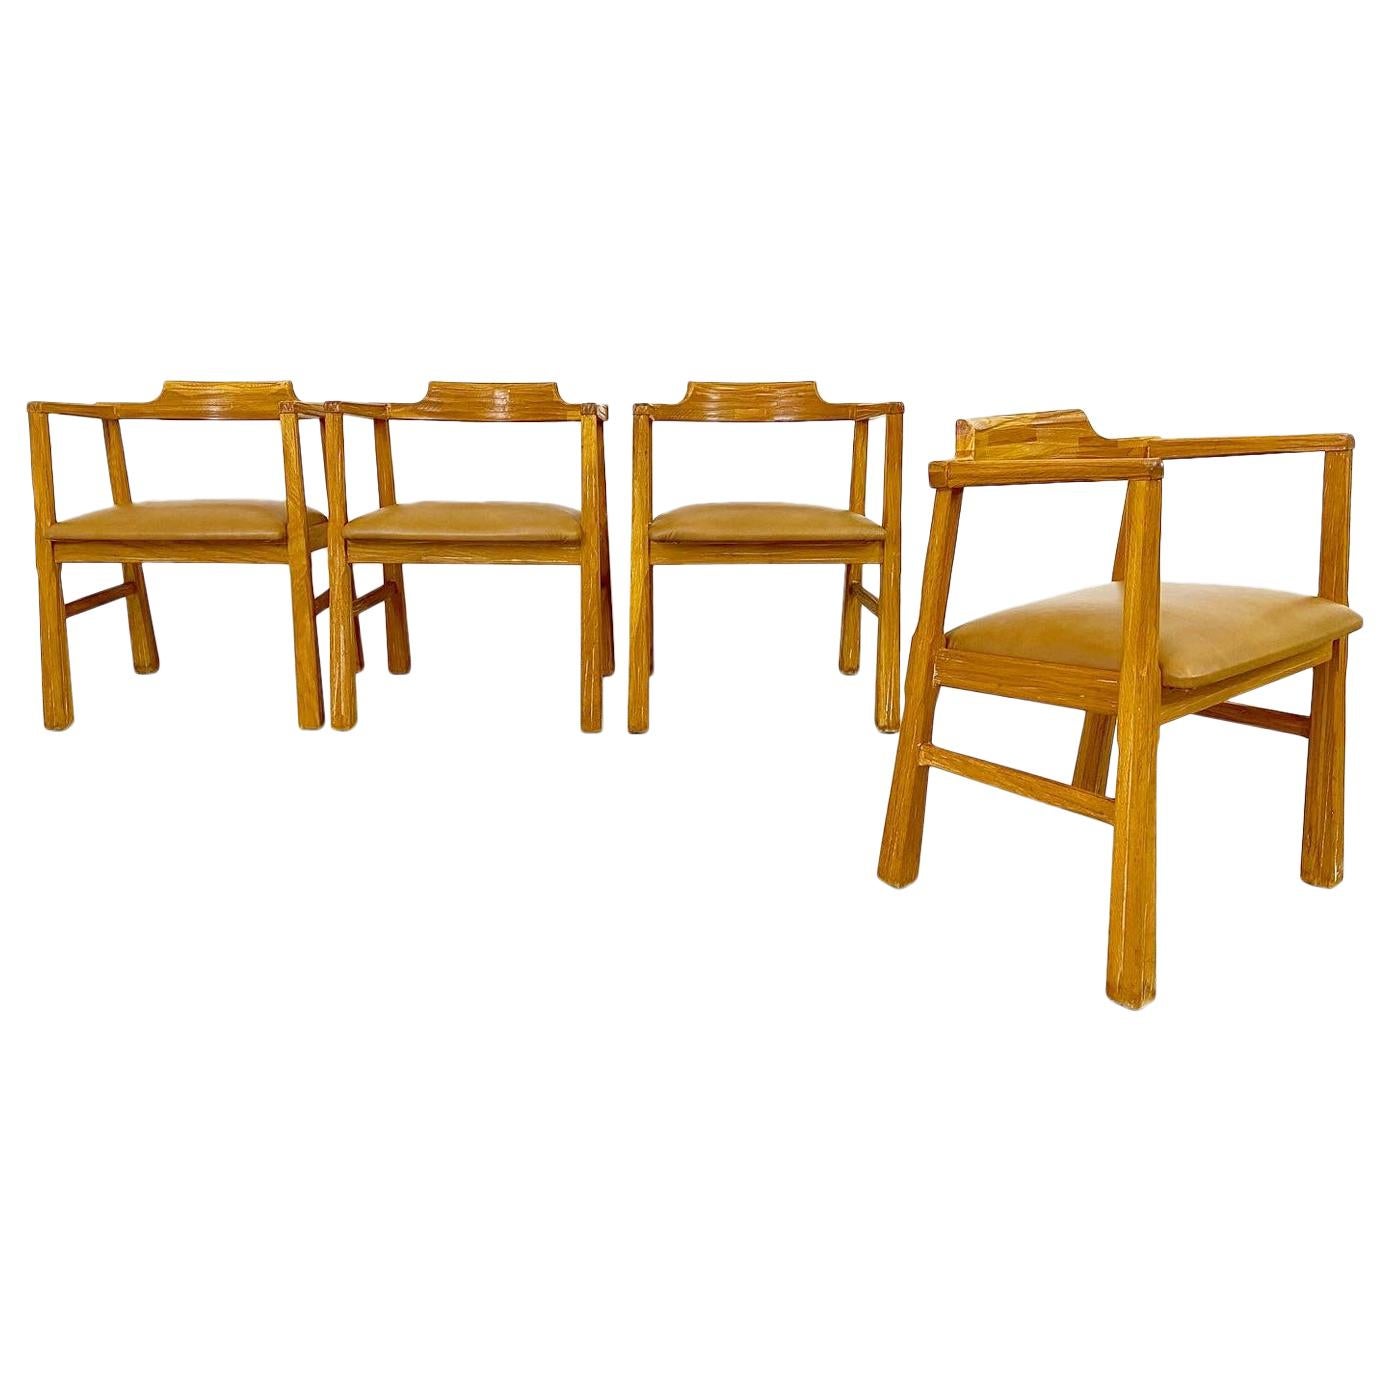 Rustic Modern Brandt Ranch Oak Dining Chairs, Set of 4